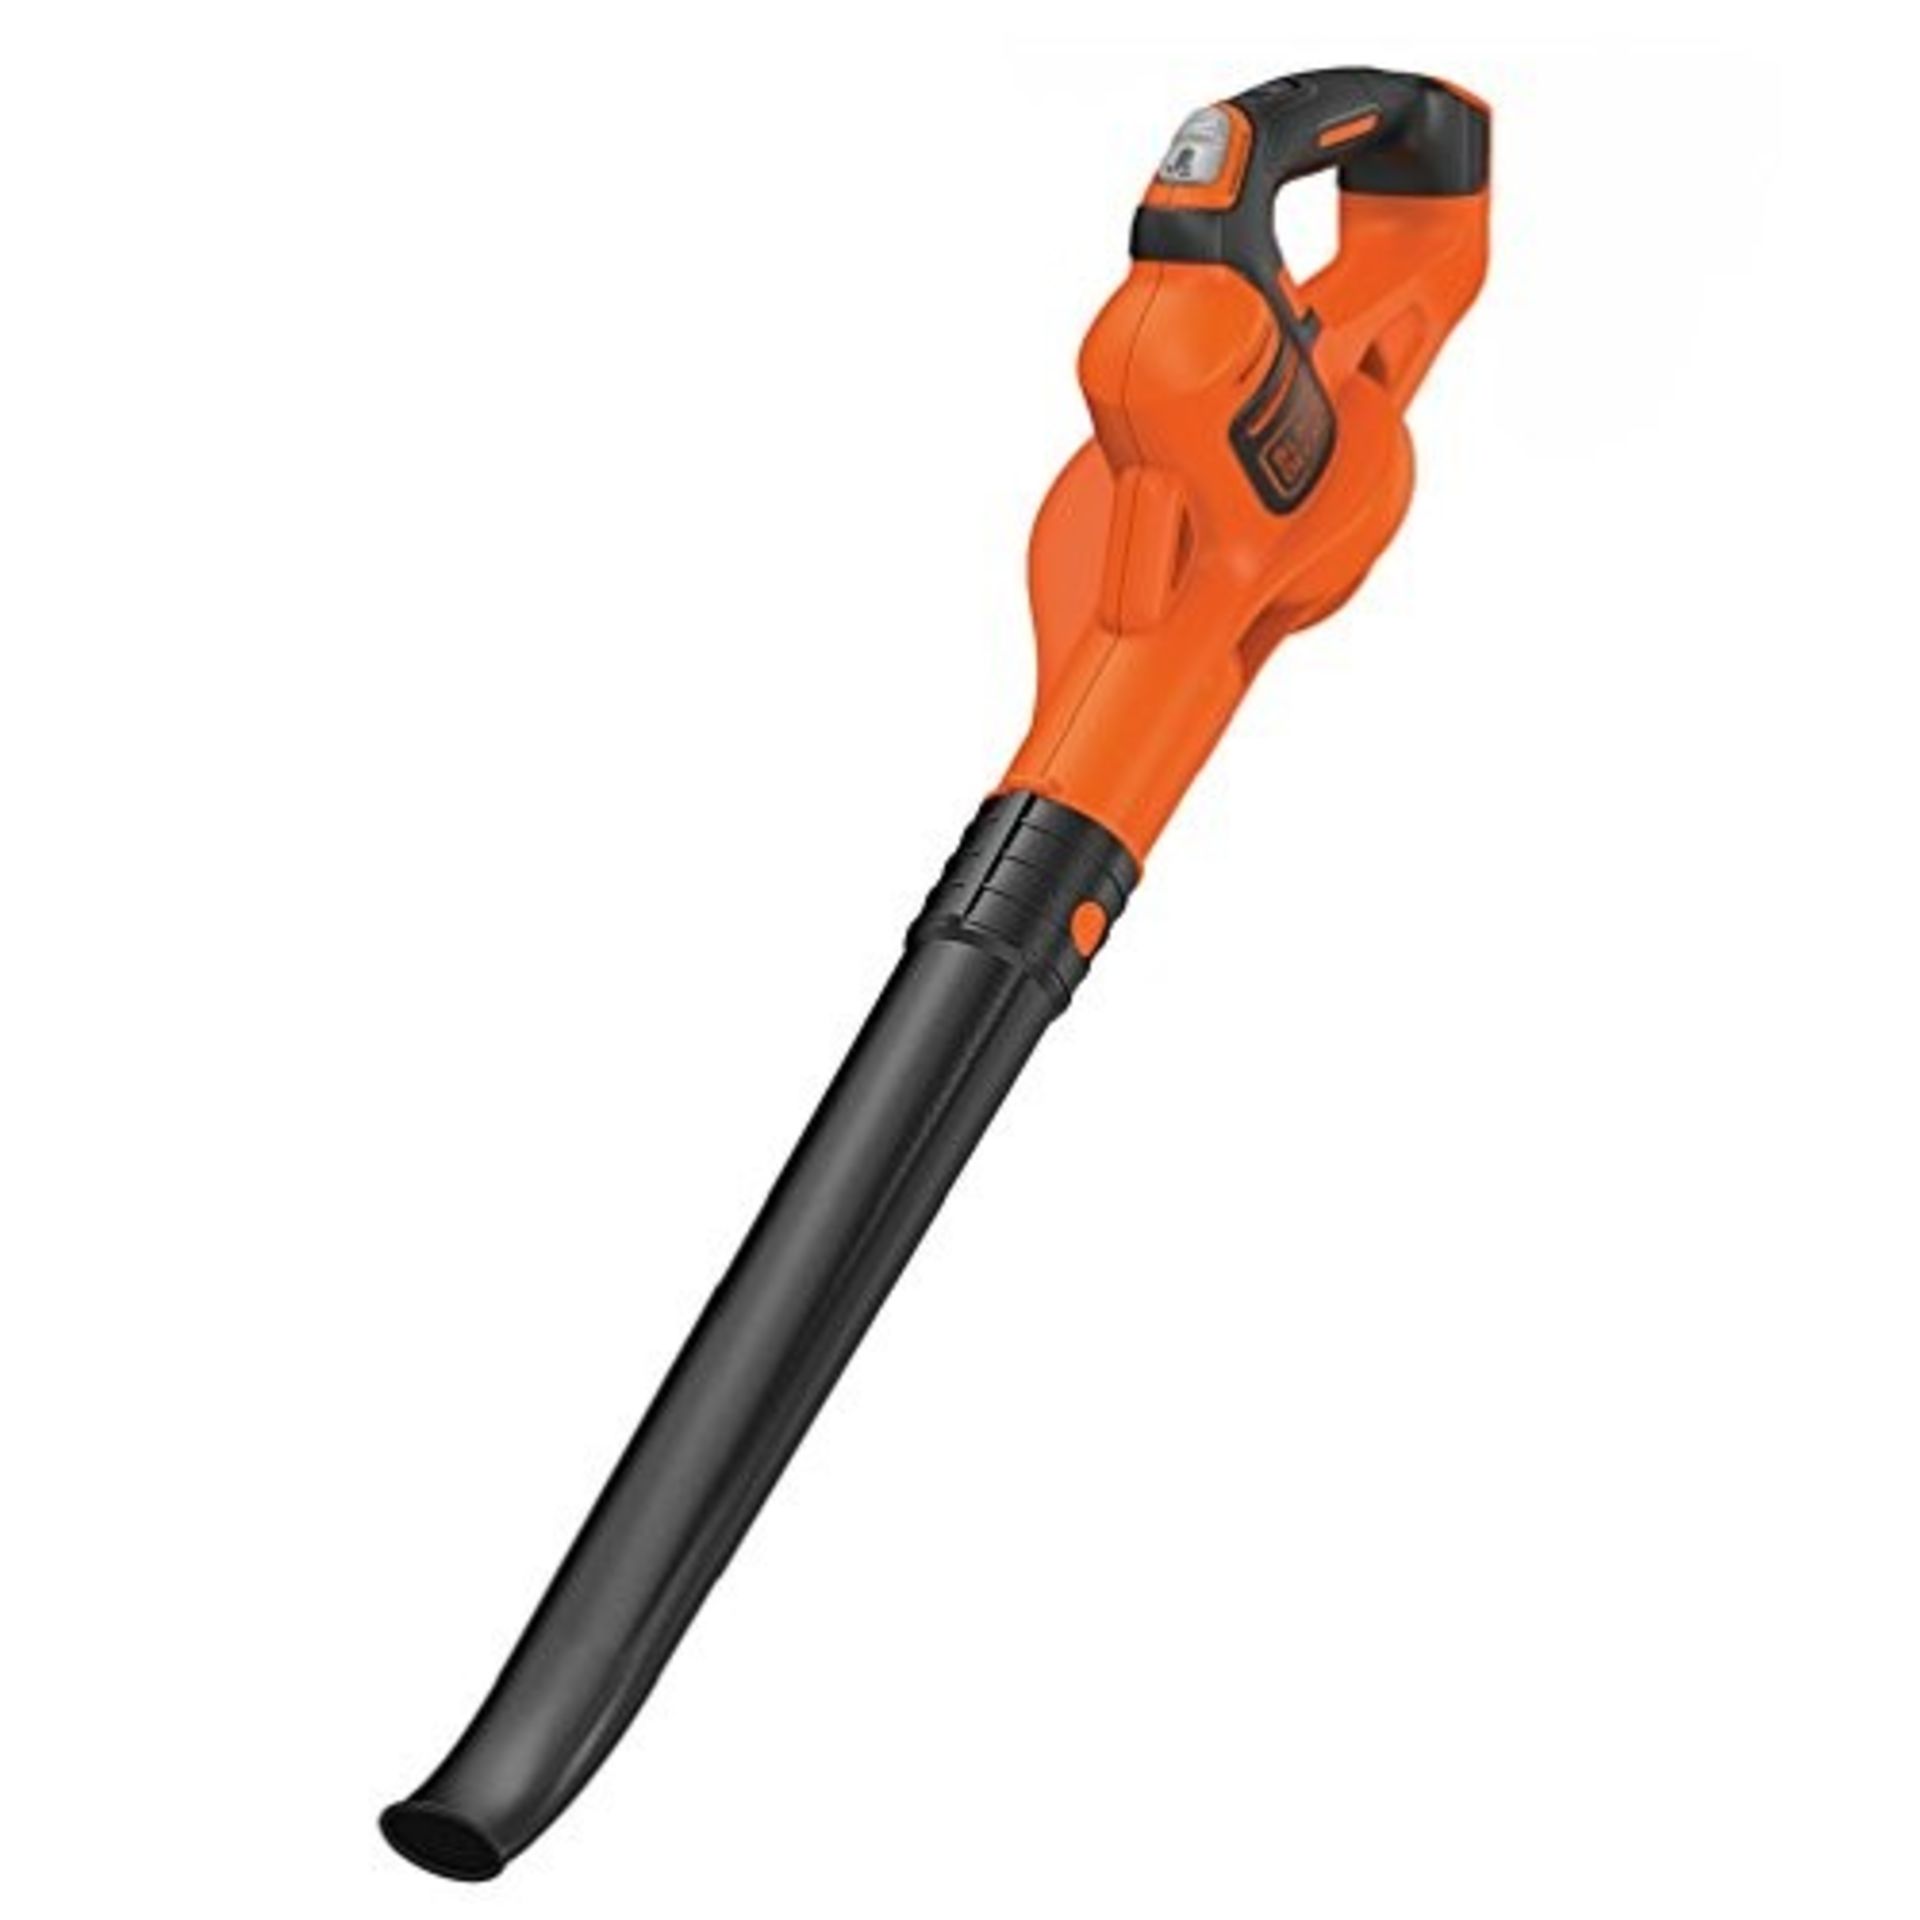 BLACK+DECKER 18V Cordless Blower with Boost Mode